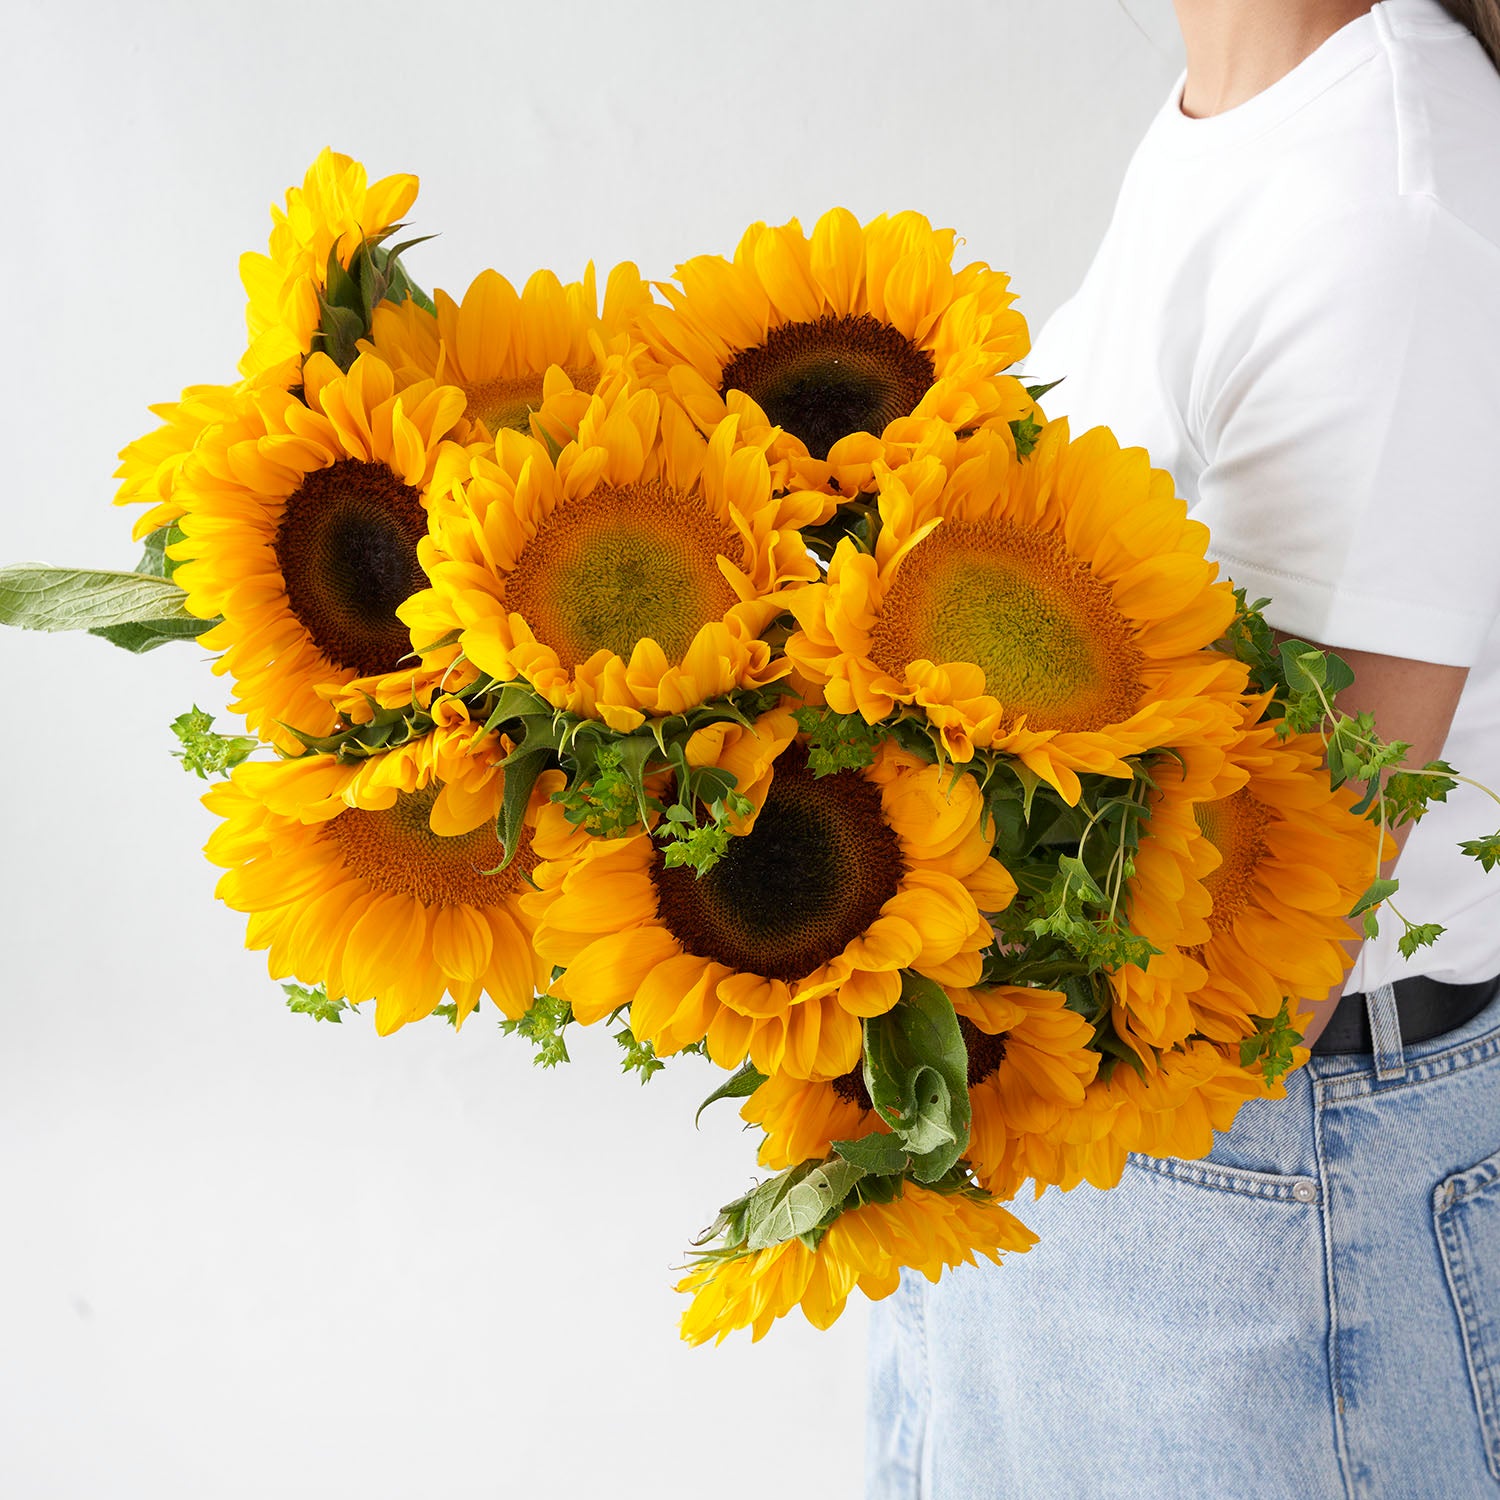 Woman in white shirt and jeans holding large bouquet of sunflowers.